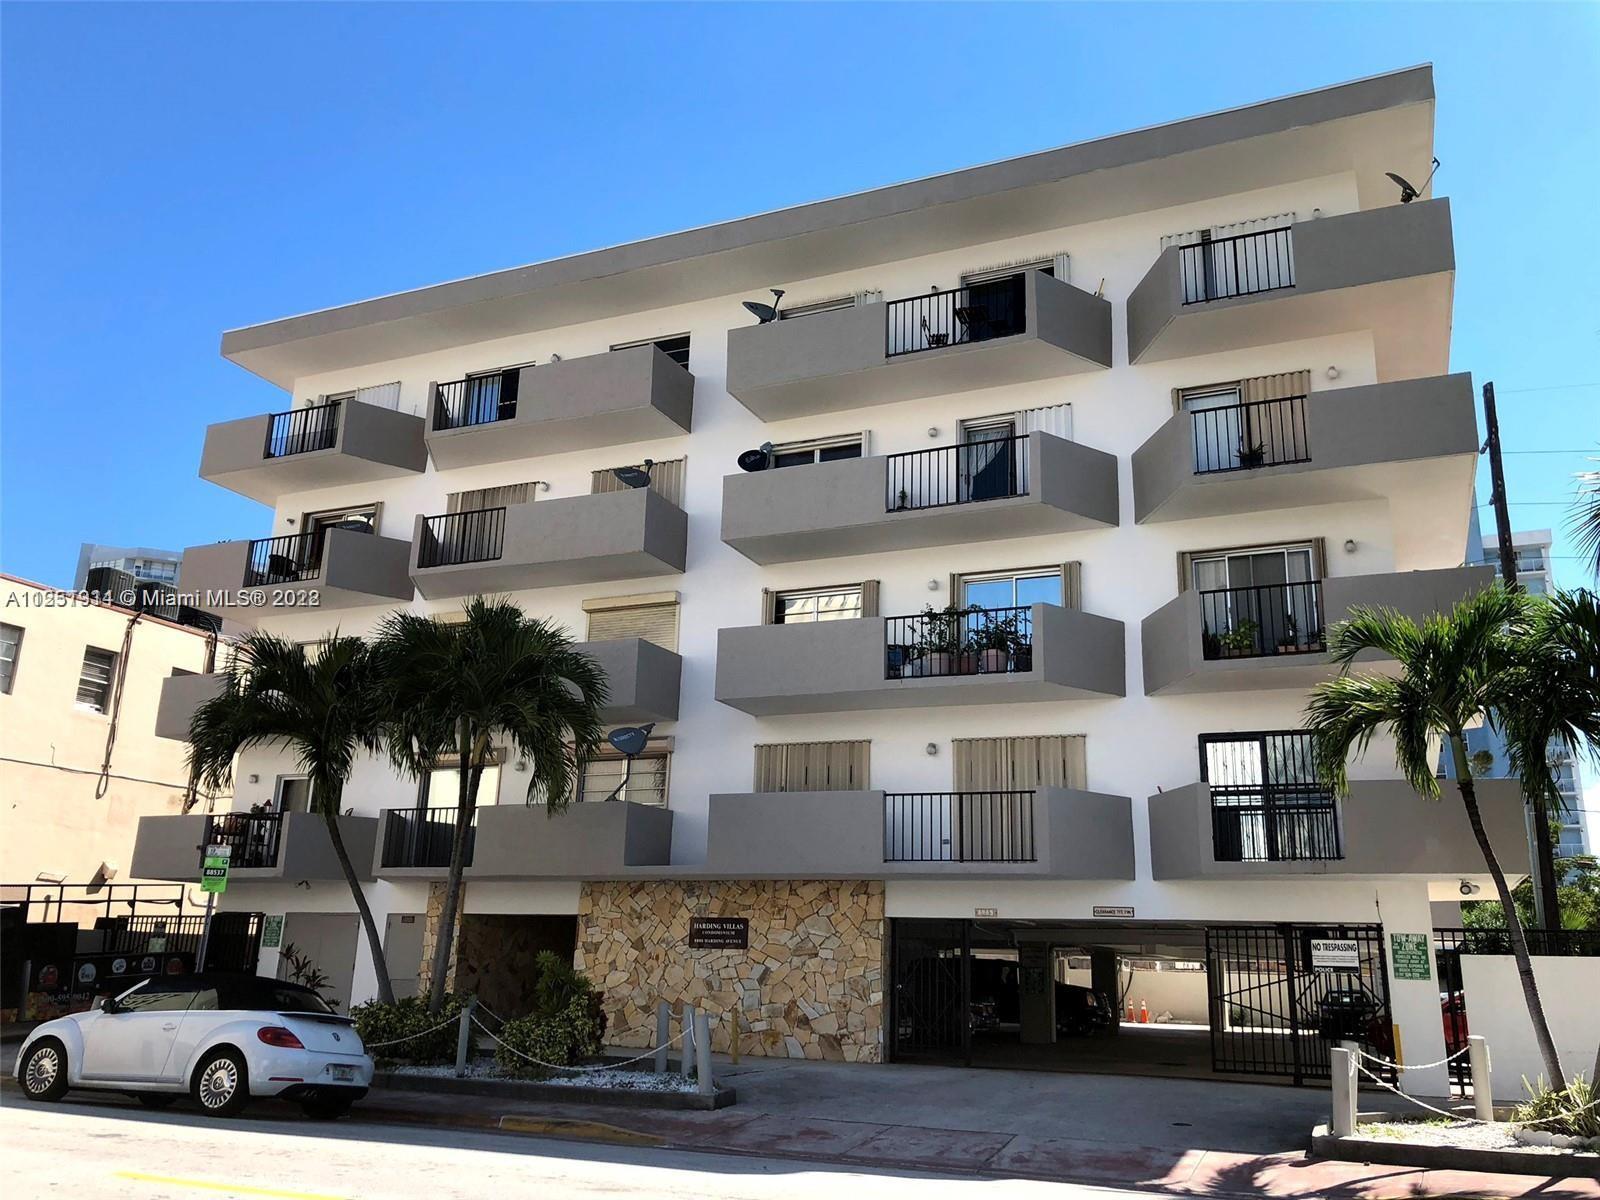 Very nice remodeled 1 bed, 1.5 bath apartment, walking distance to the beach, shops, restaurant, and